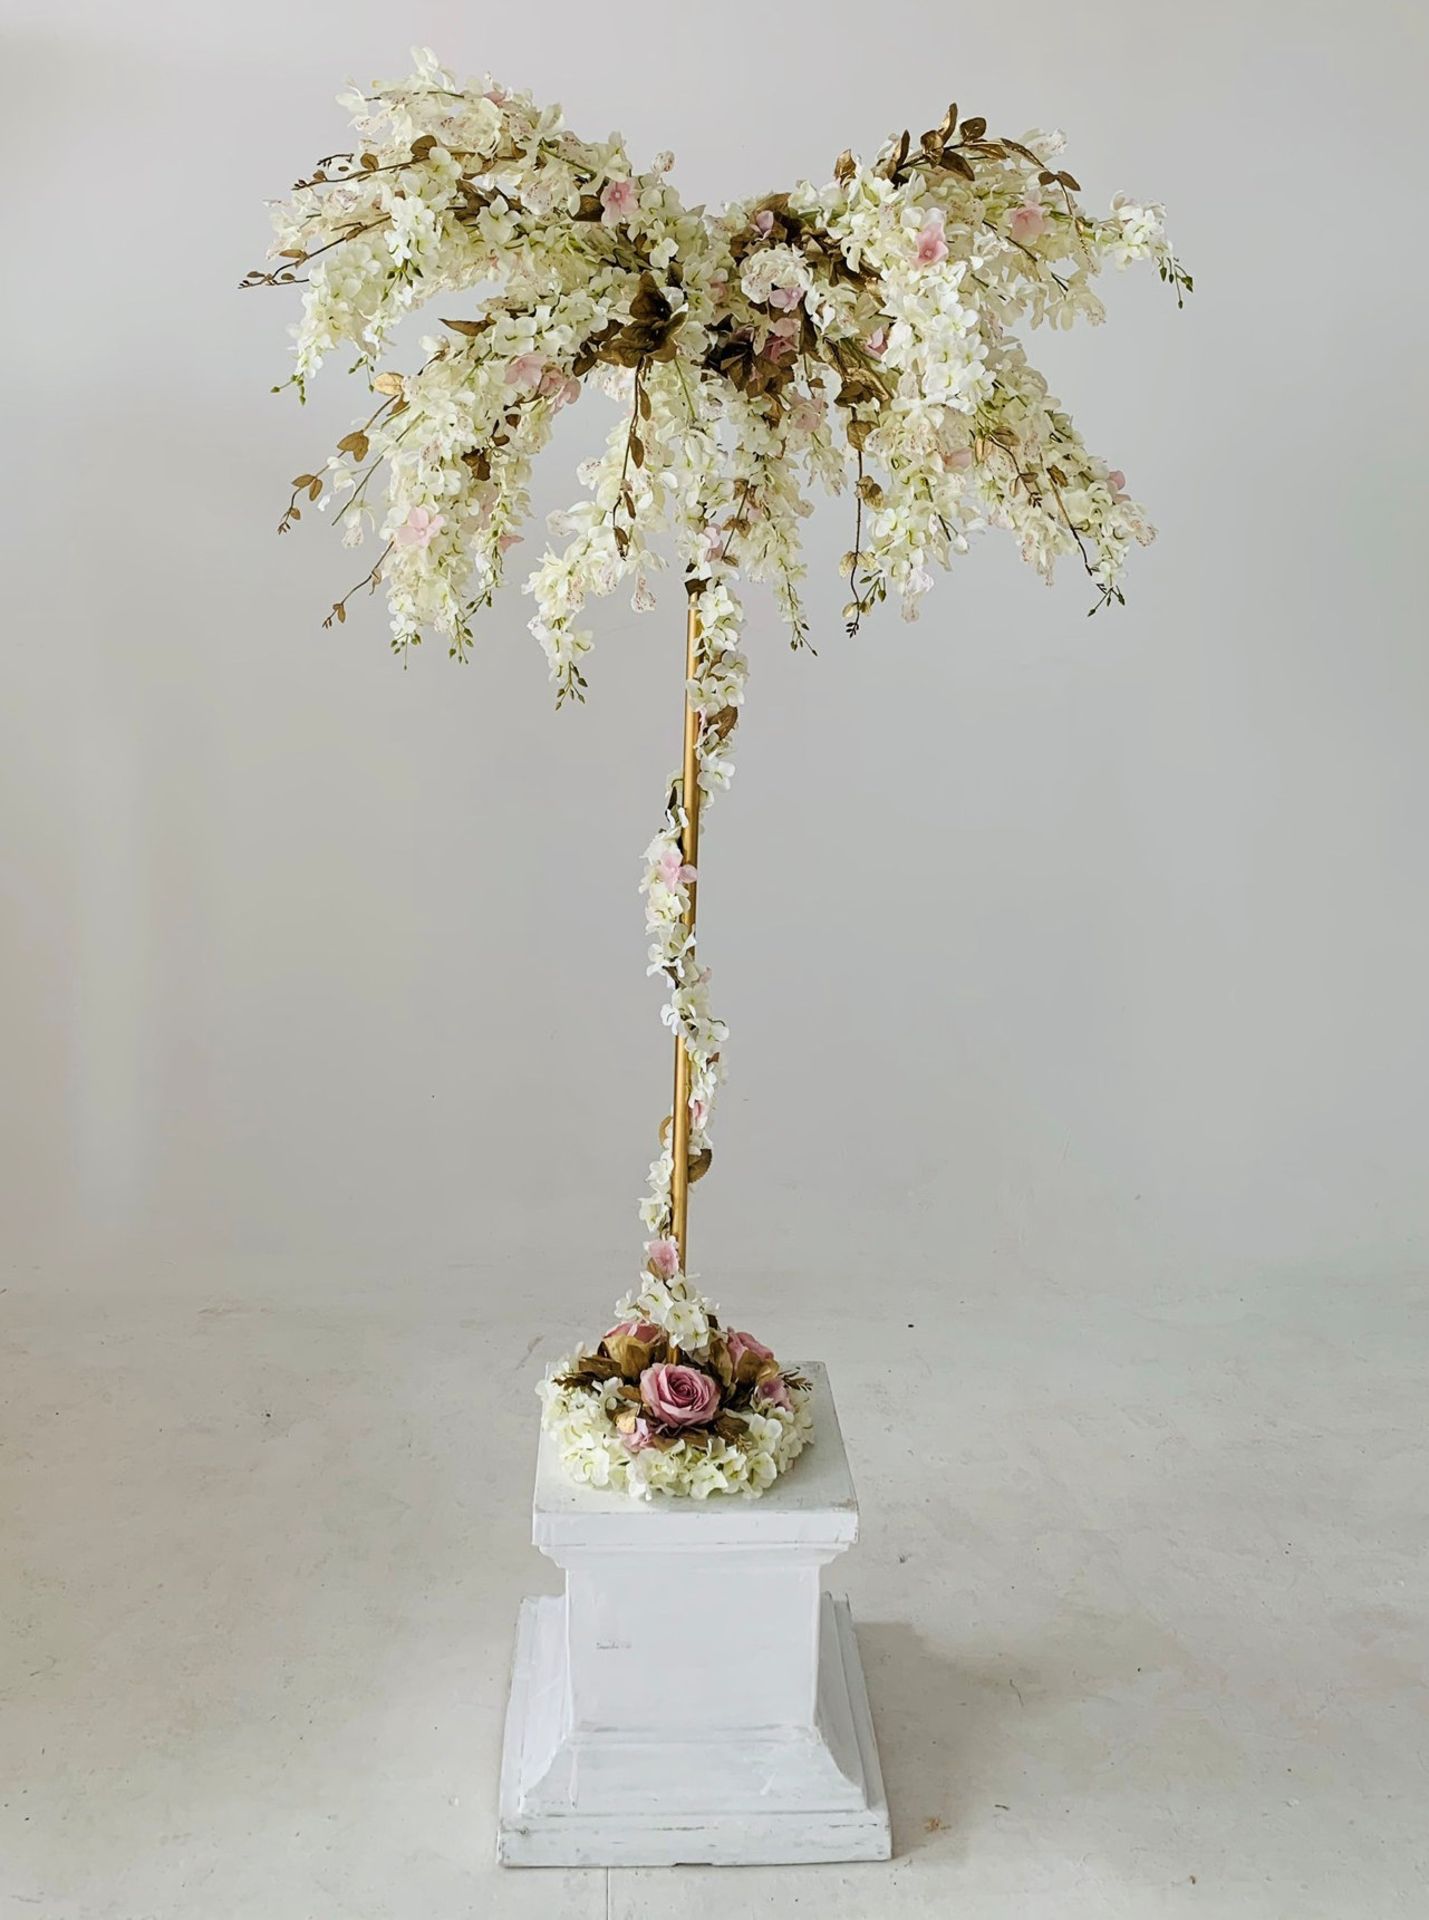 1 x Ivory Floral Tree - One-off Bespoke Example - Dimensions: Approx. 4ft - Ref: Lot 1 - CL548 - - Image 2 of 2